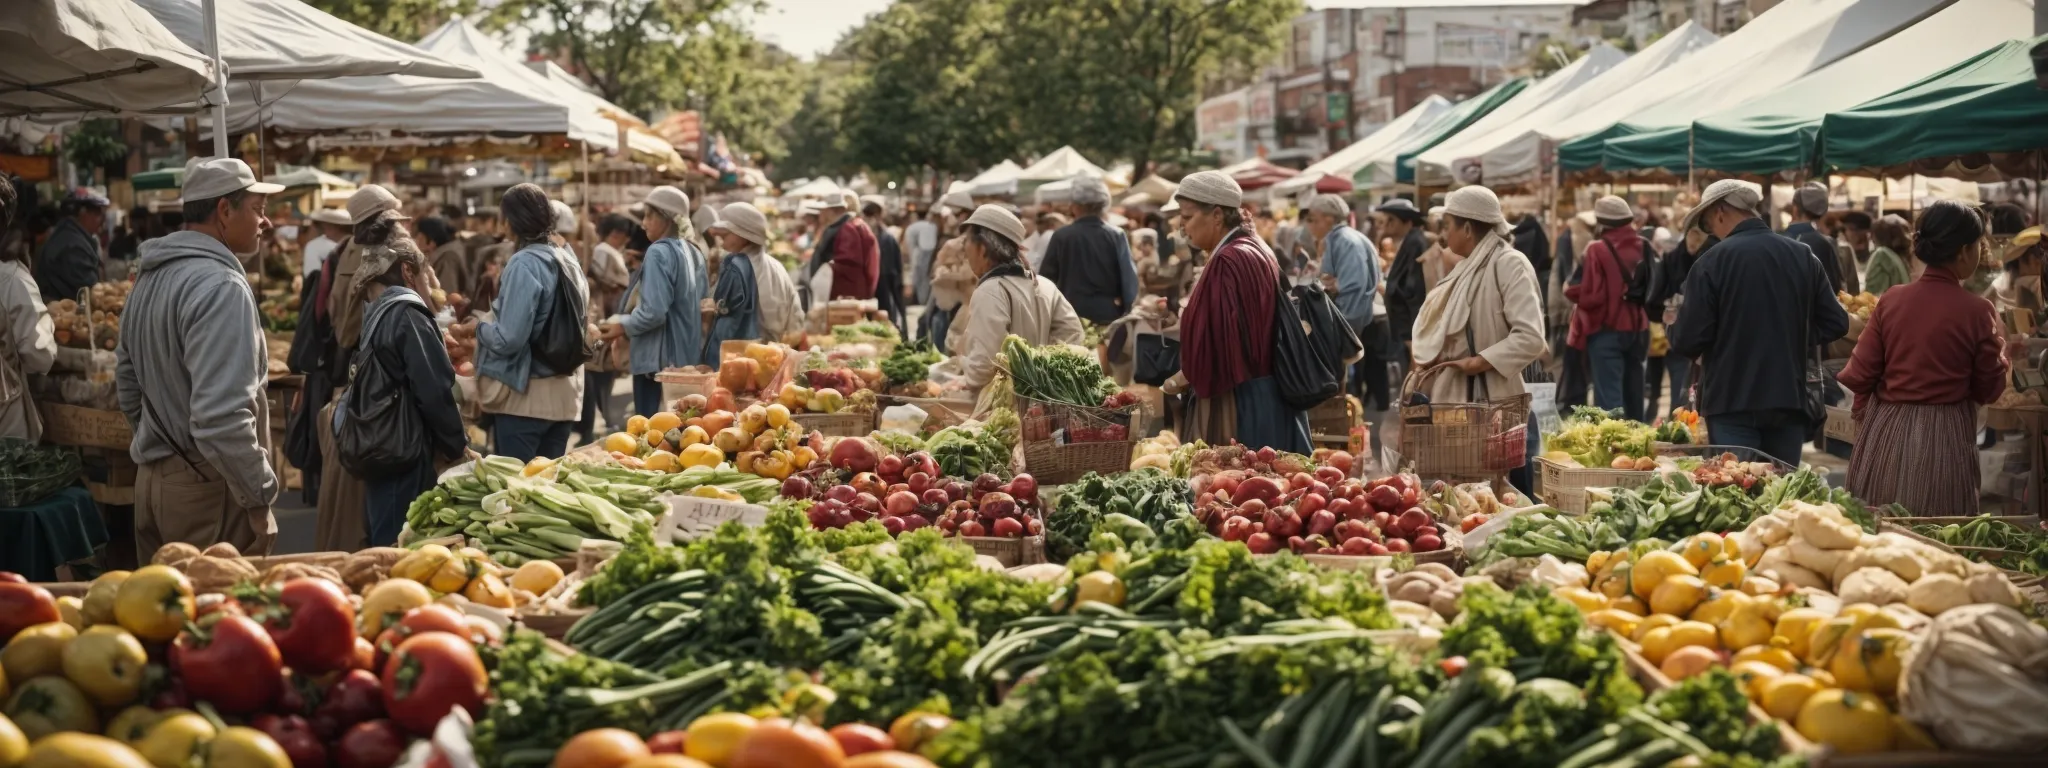 a bustling farmers' market with vibrant stalls and engaged shoppers illustrates the spirit of community and local business synergy.